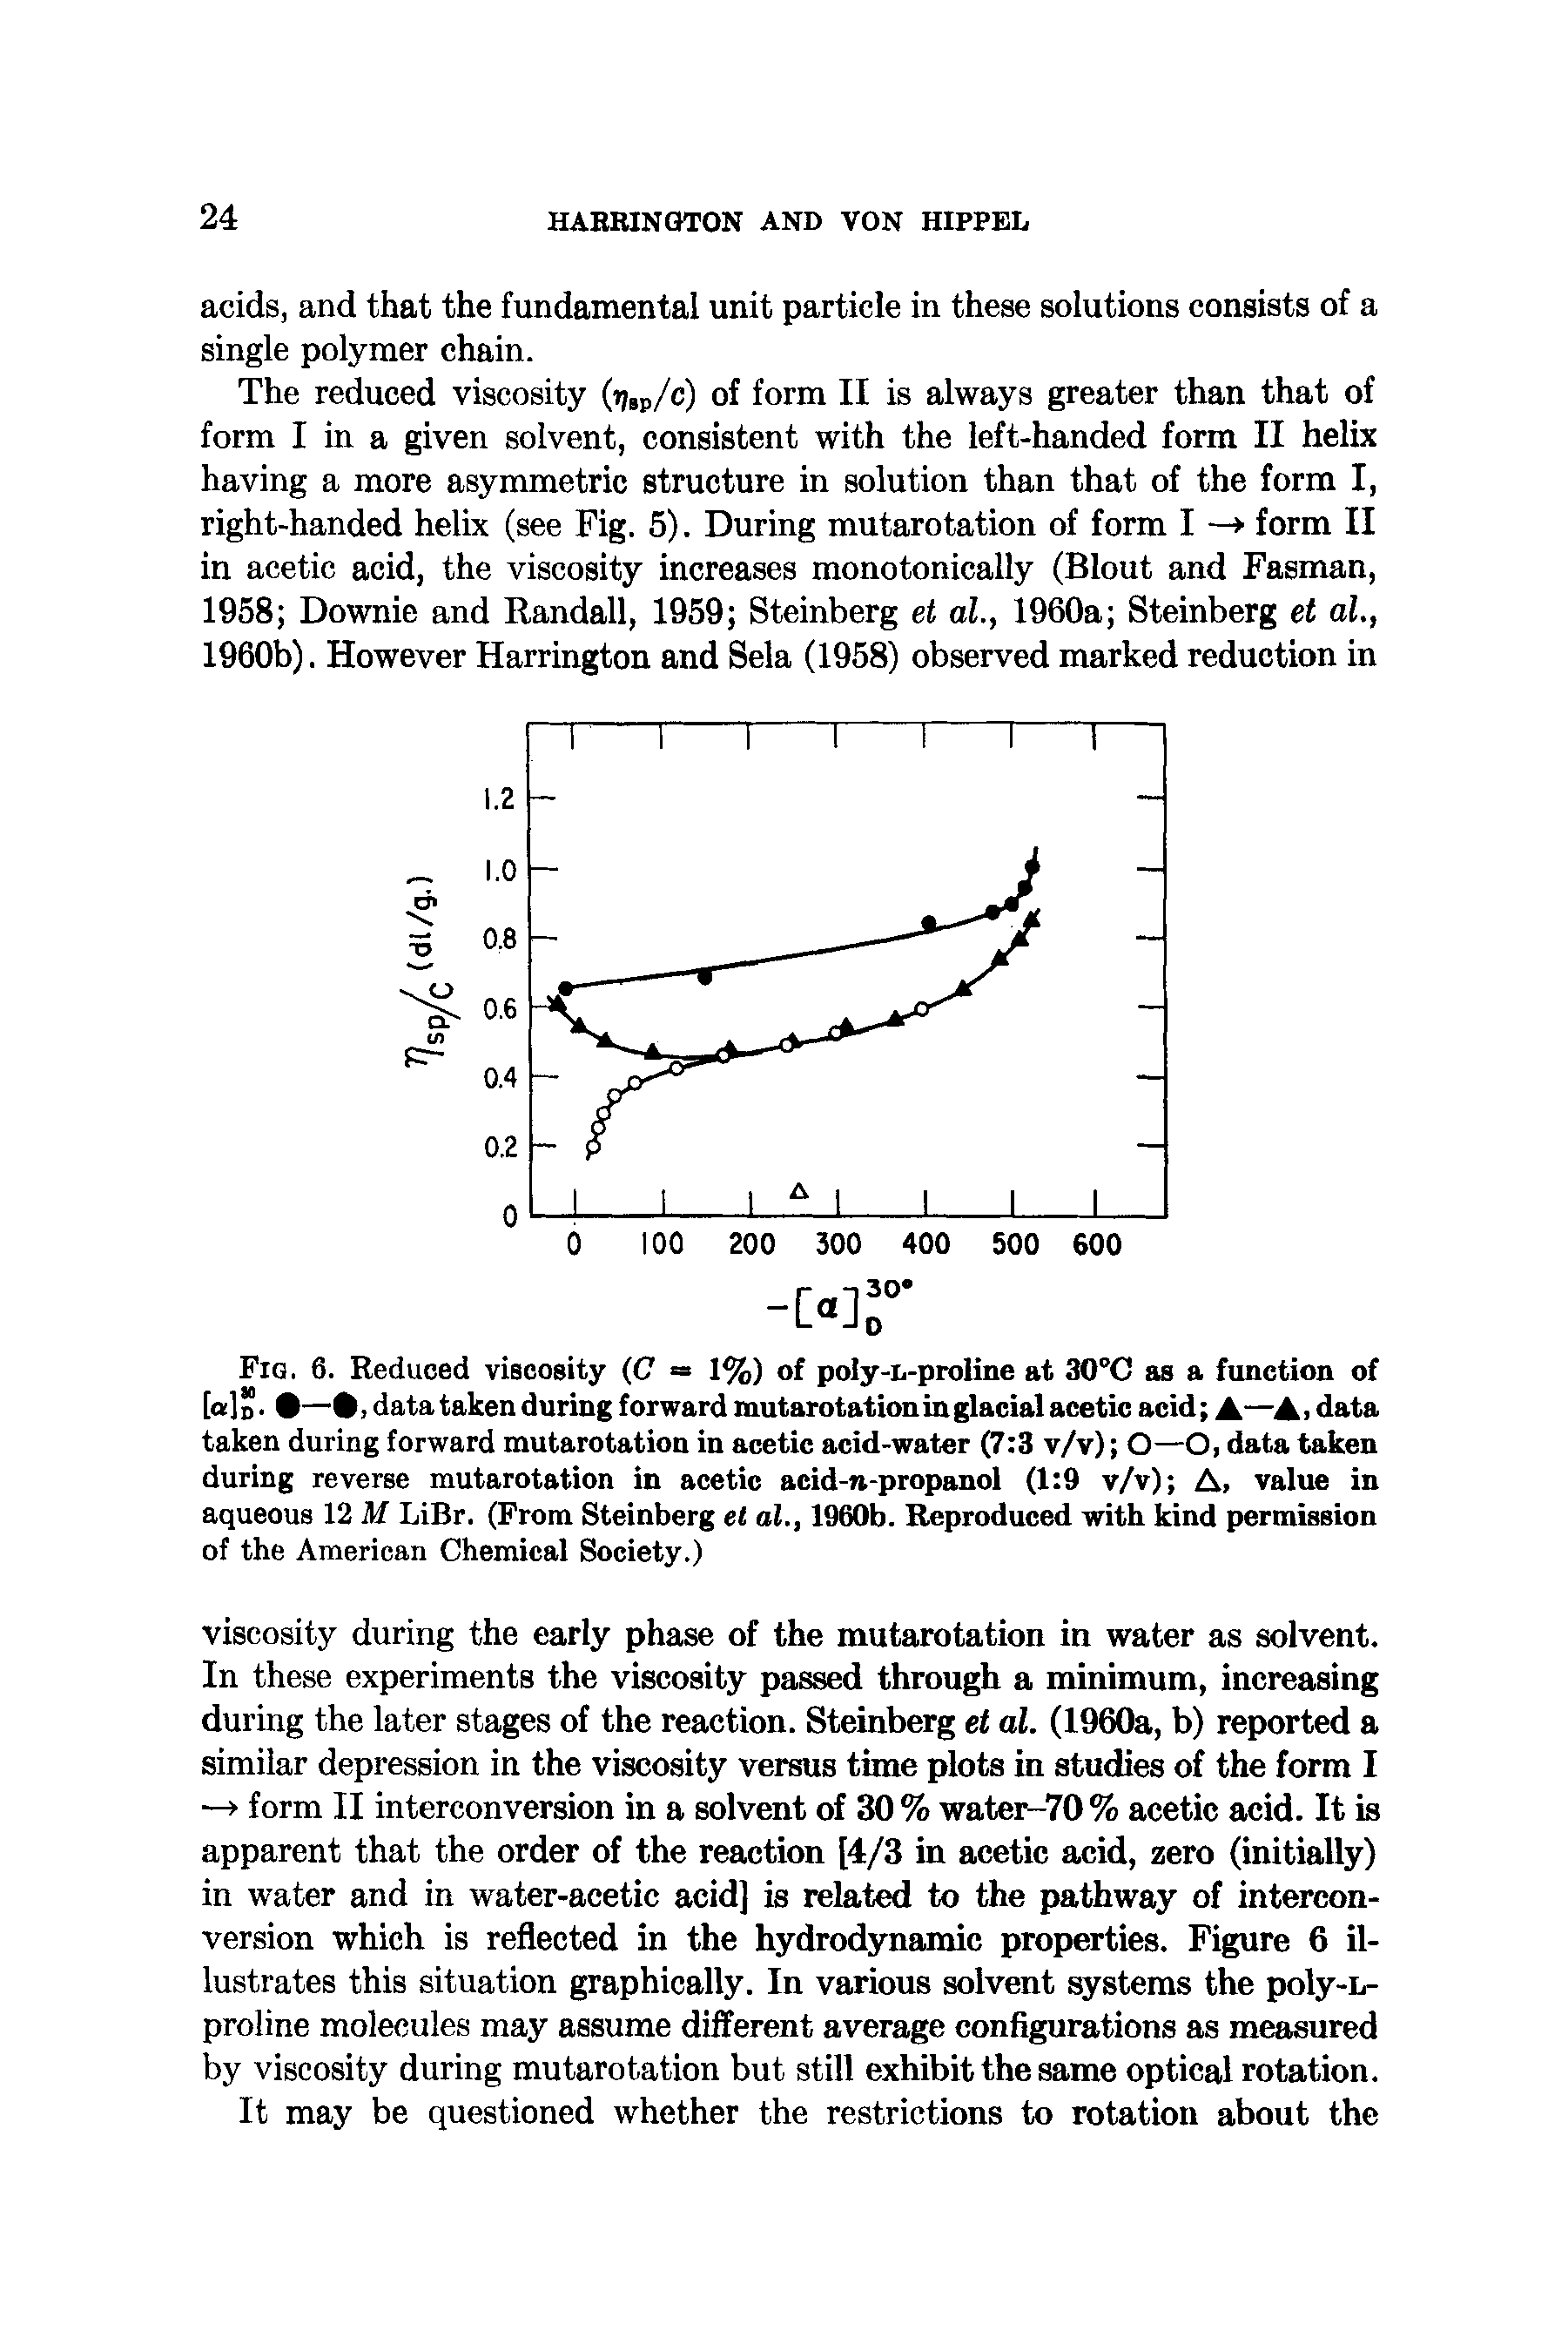 Fig. 6. Reduced viscosity (C = 1%) of poly-n-proline at SCO as a function of [a]". —, data taken during forward mutarotation in glacial acetic acid A—Ai data taken during forward mutarotation in acetic acid-water (7 3 v/v) O—O, data taken during reverse mutarotation in acetic acid- -propanol (1 9 v/v) A, value in aqueous 12 M LiBr. (Prom Steinberg et al., 1960b. Reproduced with kind permission of the American Chemical Society.)...